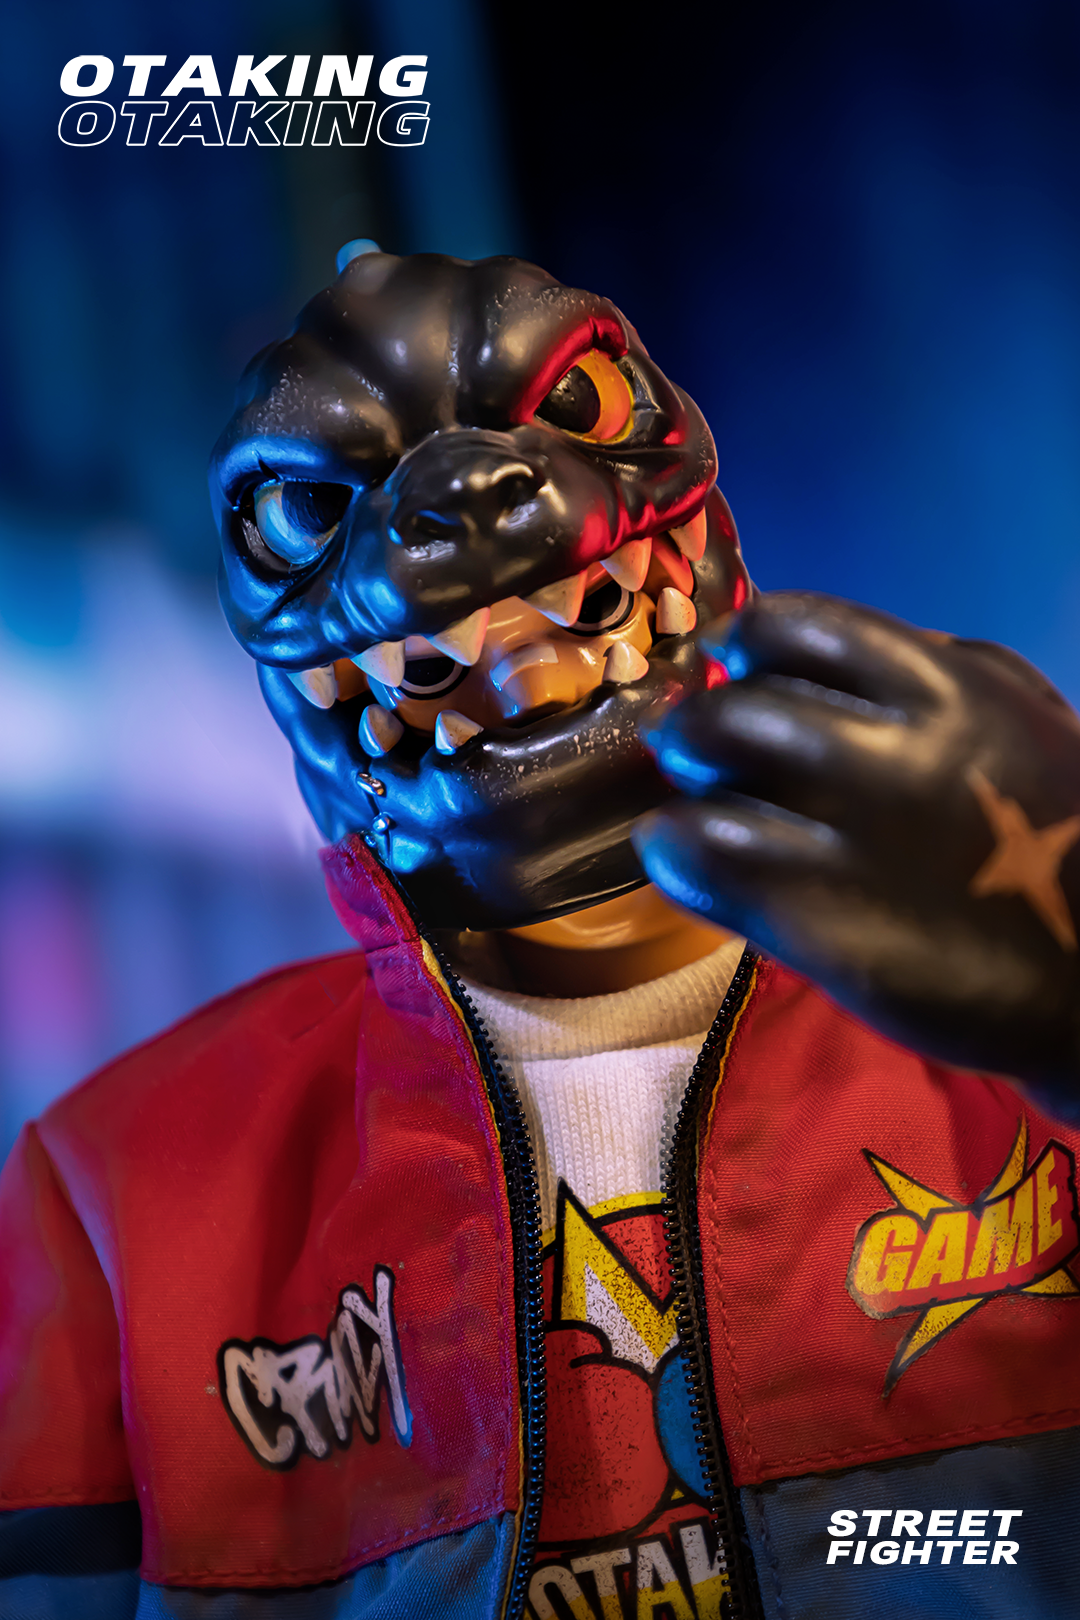 Toy figure in red jacket and black mask, close-up of logo and zipper, OTAKING - Street fighter.